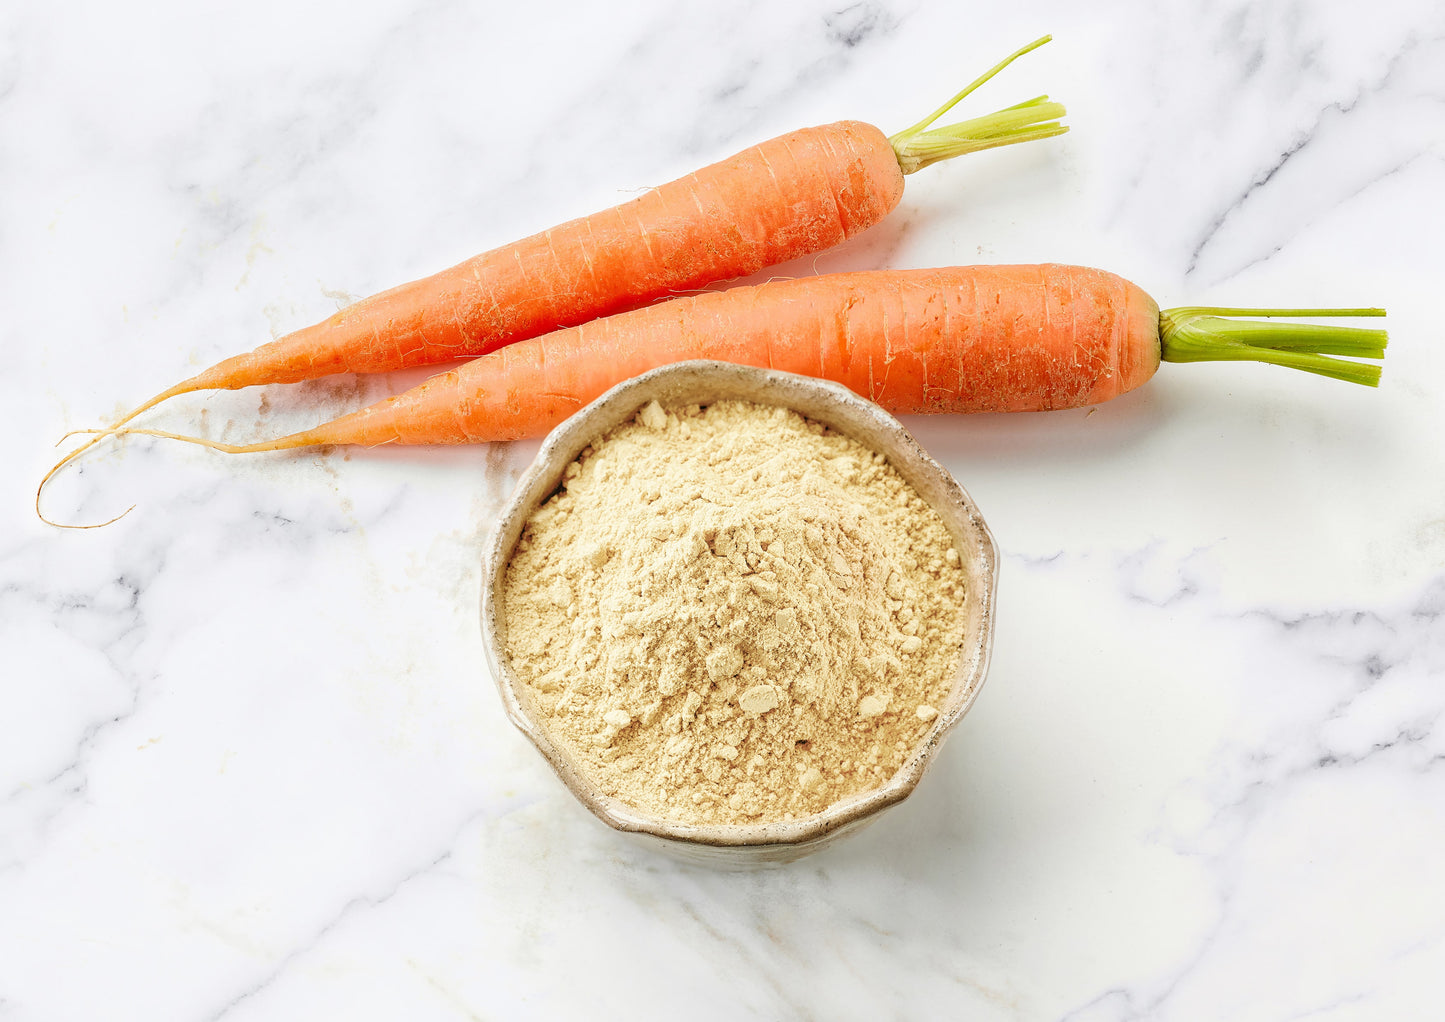 Organic Carrot Powder - Non-GMO, Ground Raw Dried Roots, Vegan, Bulk, Great for Baking, Juices, Smoothies, Shakes, and Drinks. Good Source of Dietary Fiber, Potassium, and Vitamin A